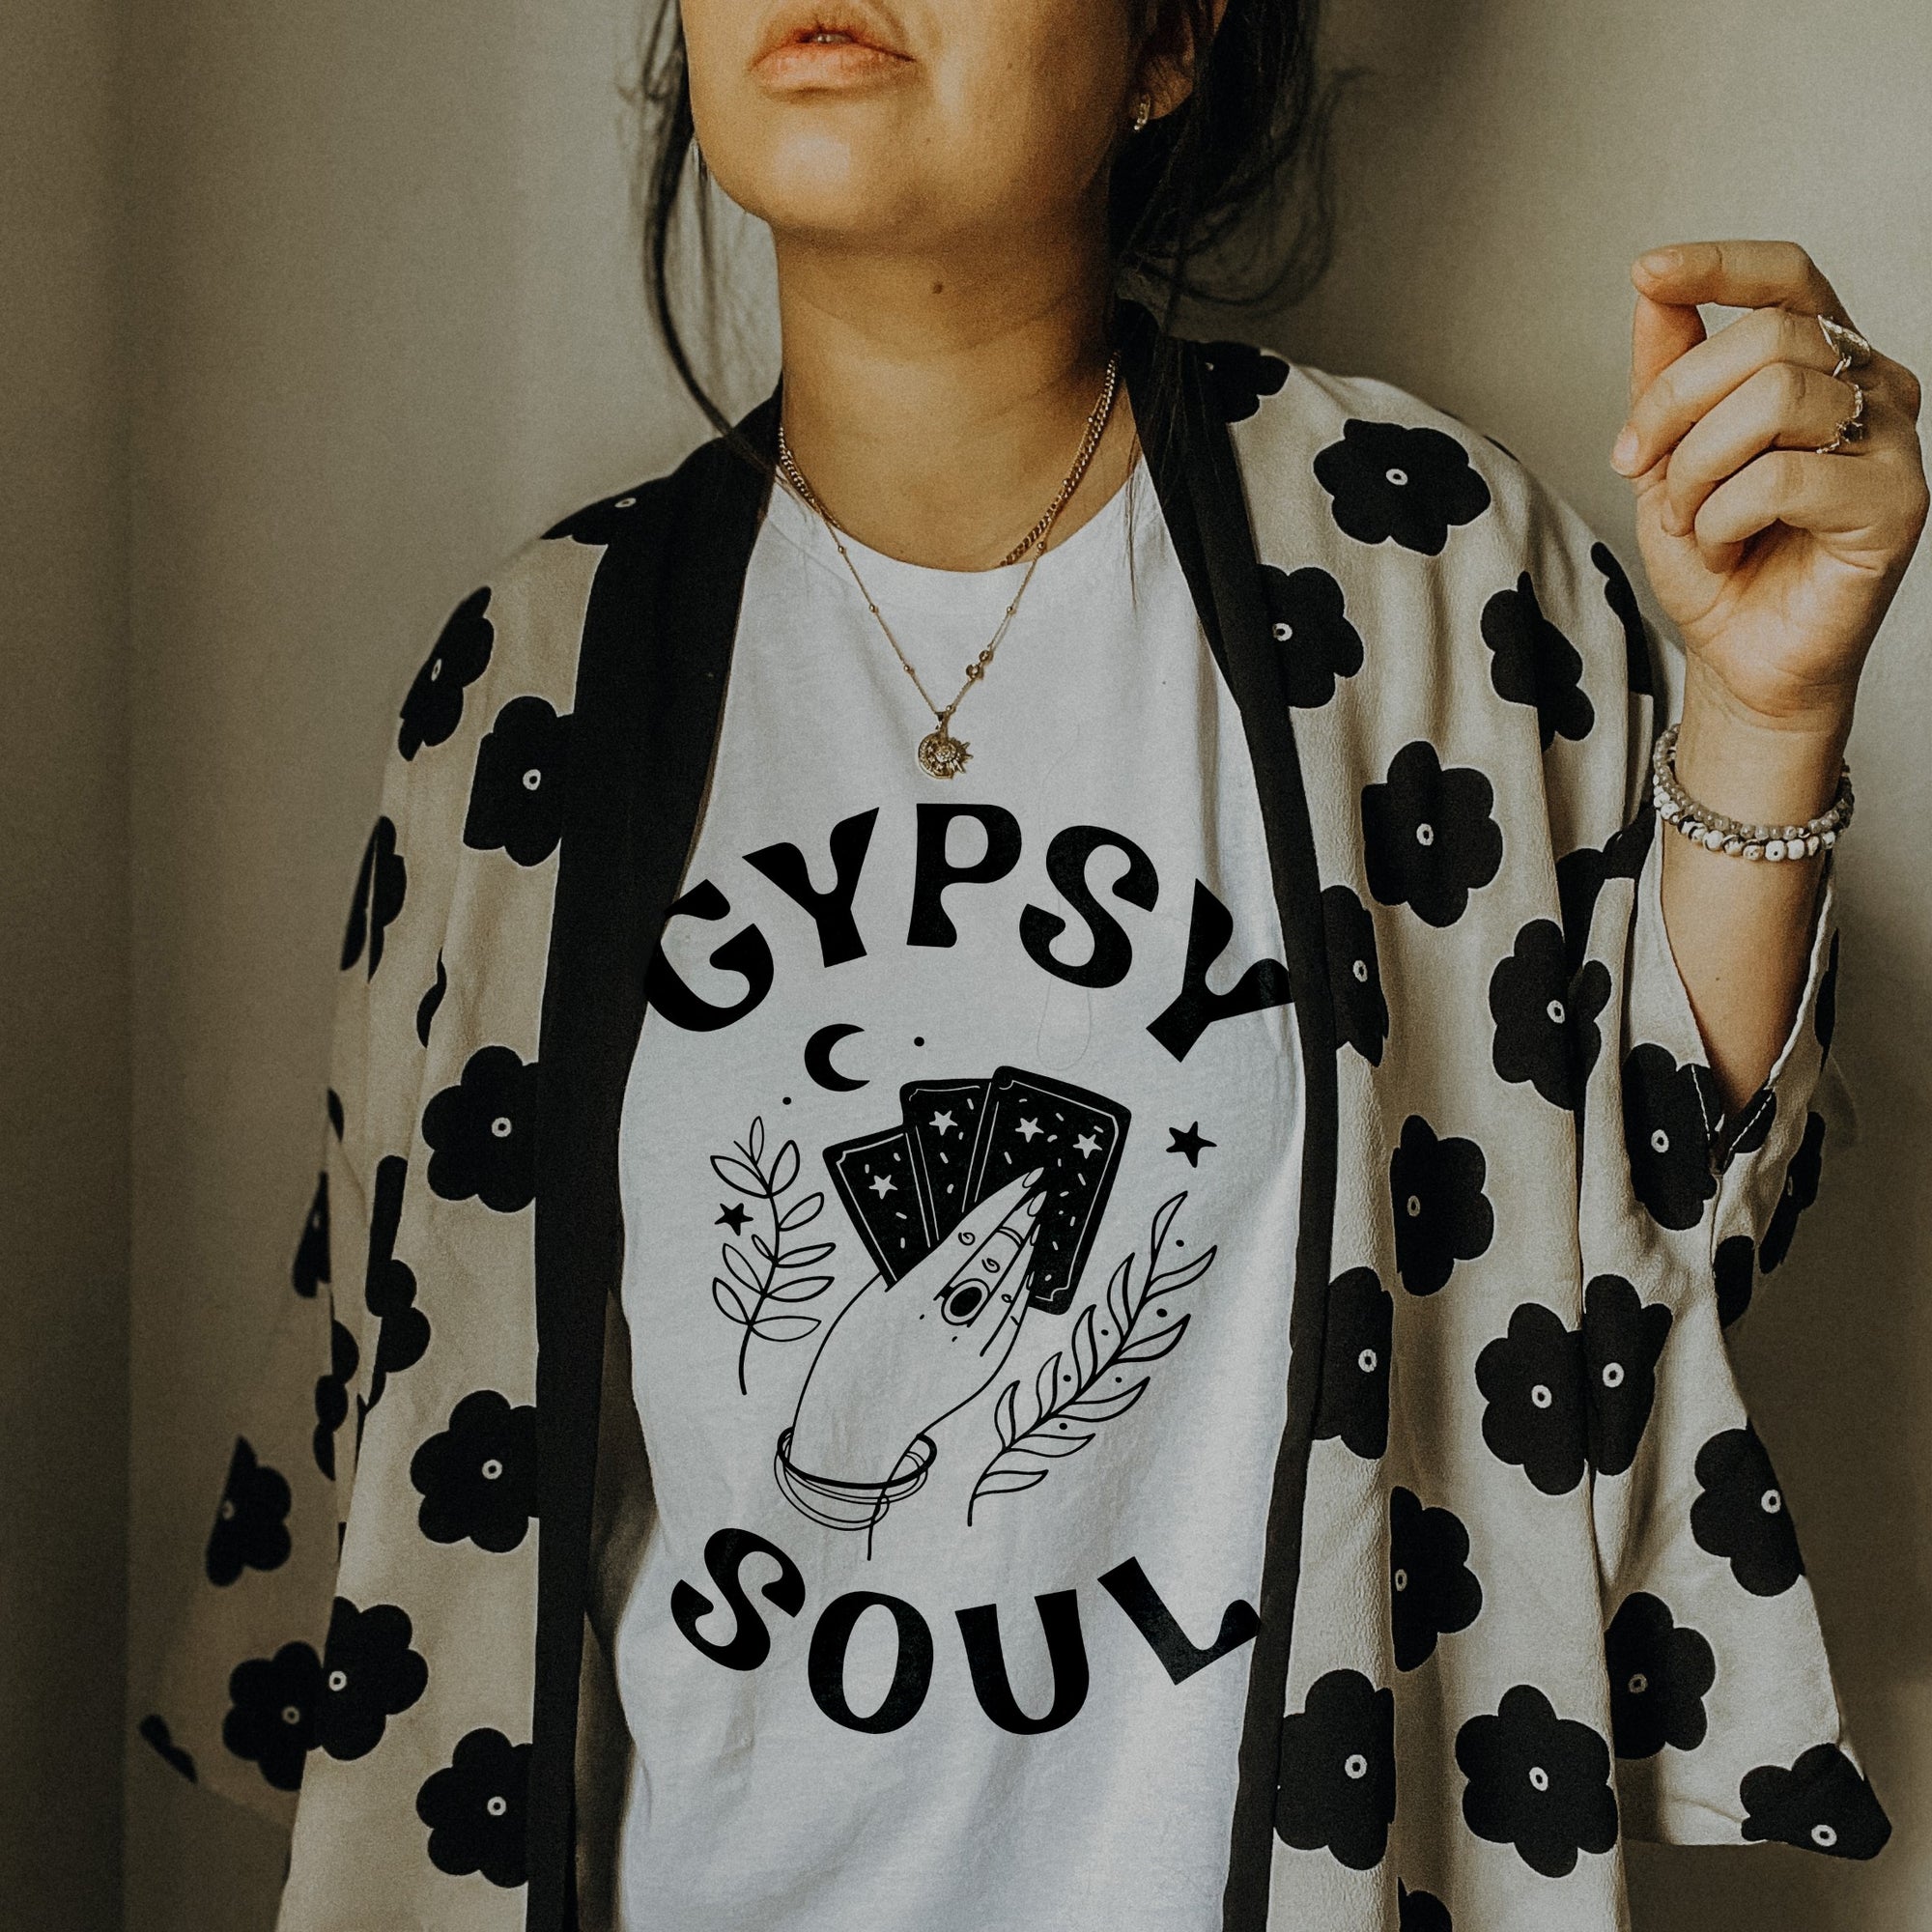 Gypsy Soul Graphic Tee Shirt (Wholesale)